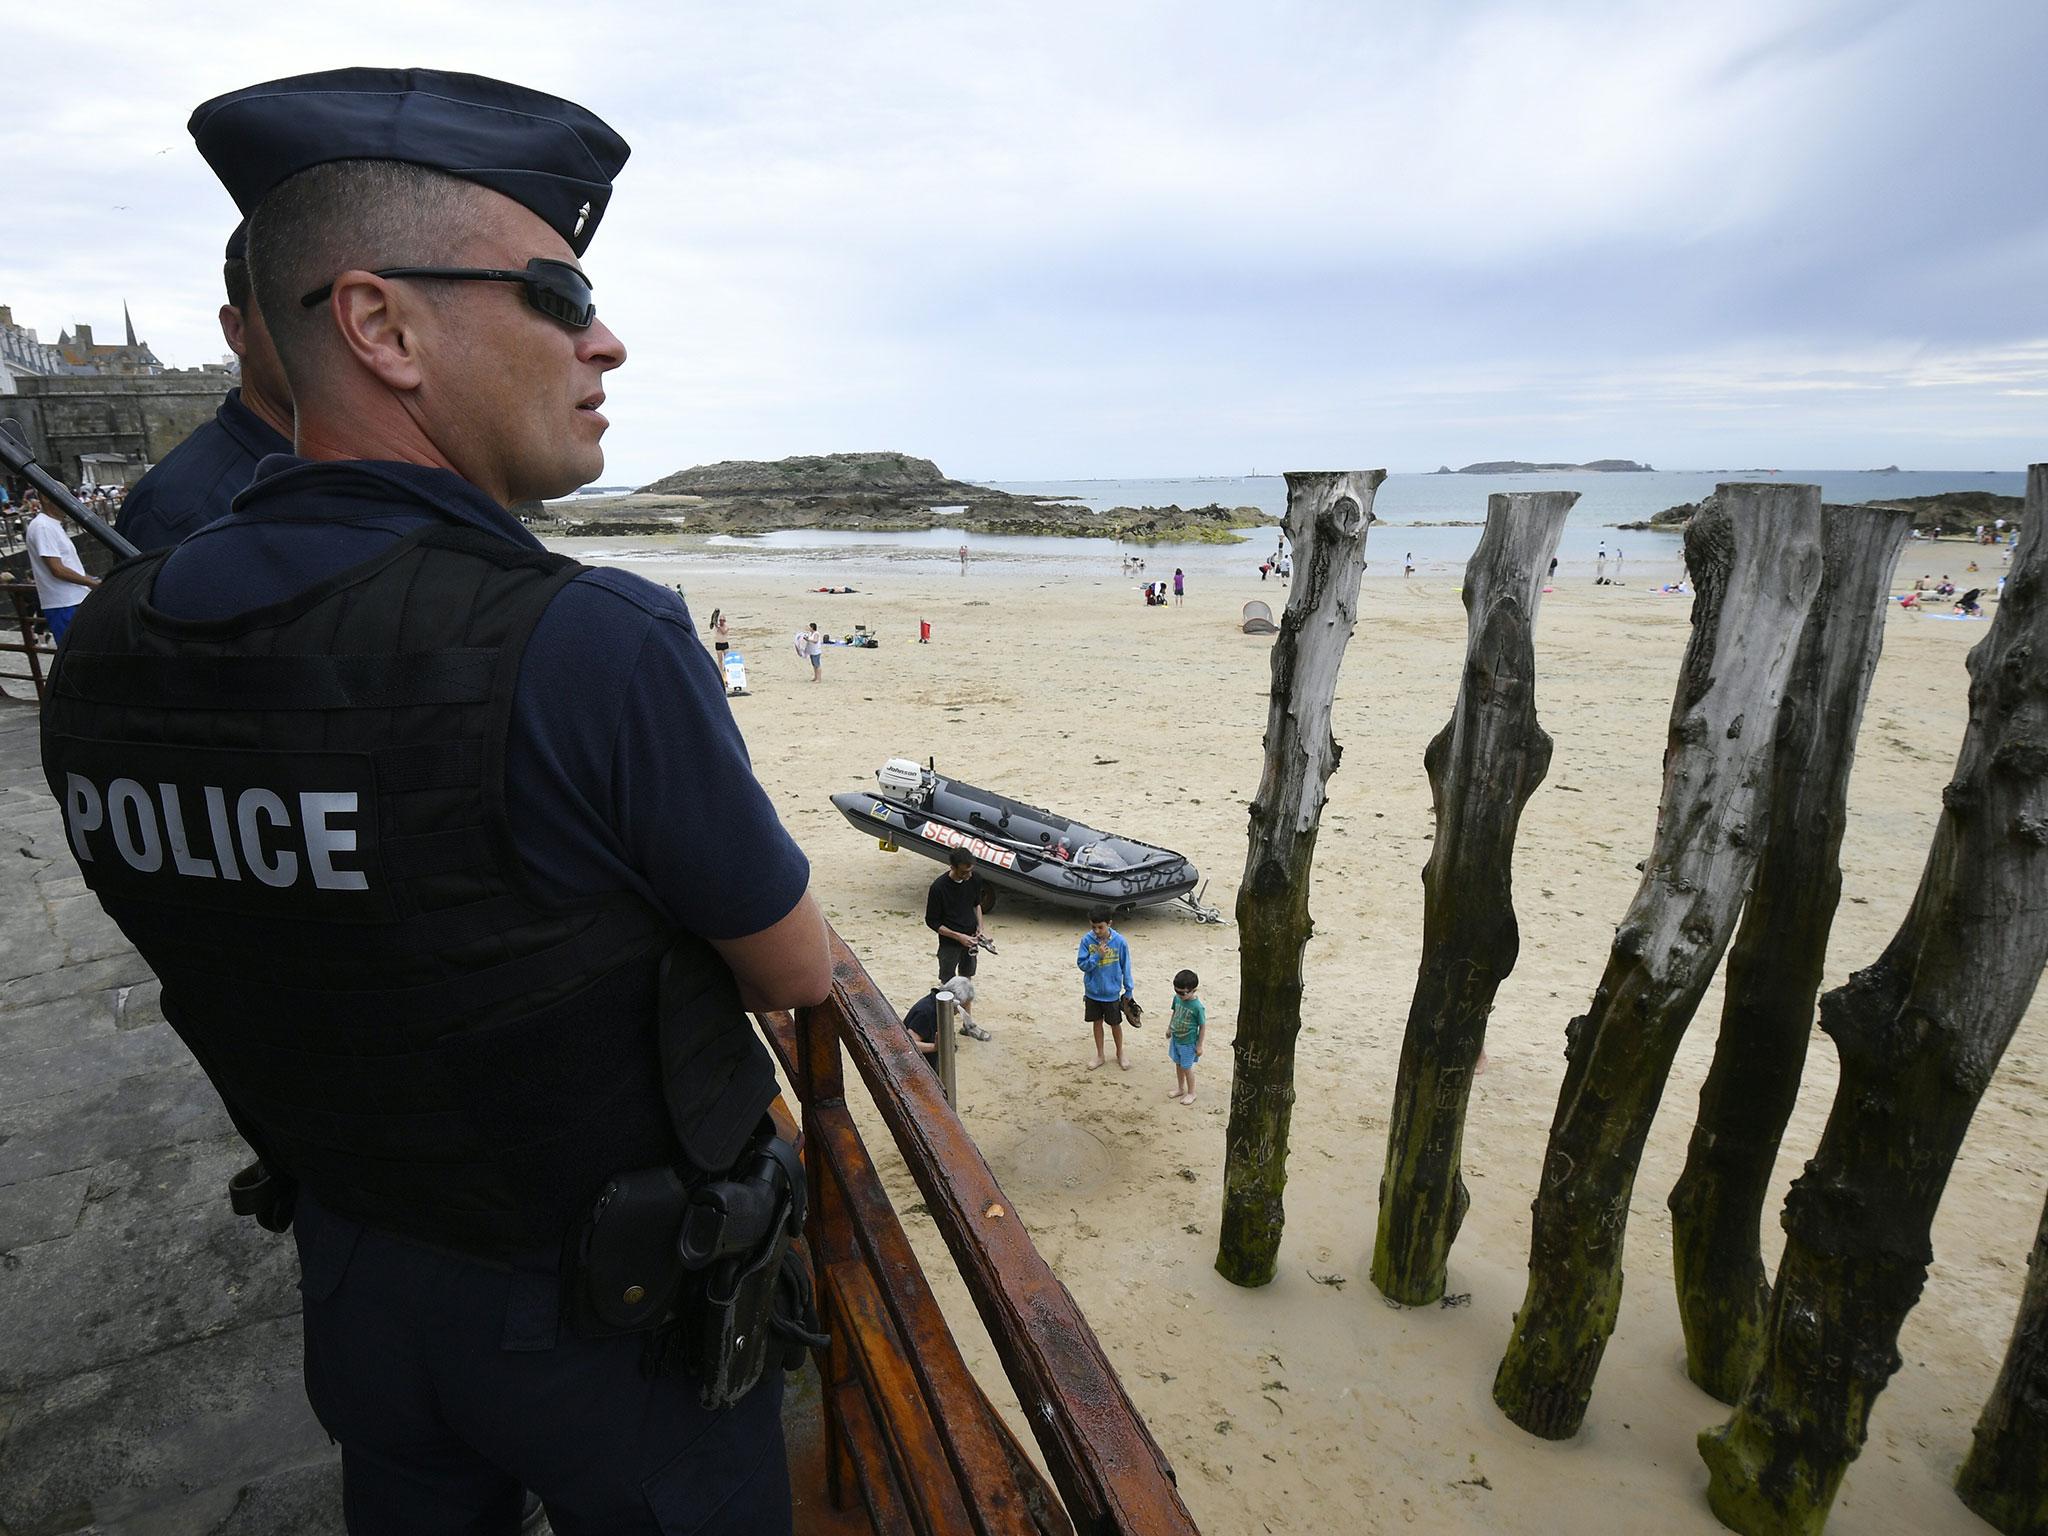 French anti-riot policemen (CRS - compagnie Republicaine de Securite) patrol close to the beach of Saint-Malo, western France on July 21, 2016